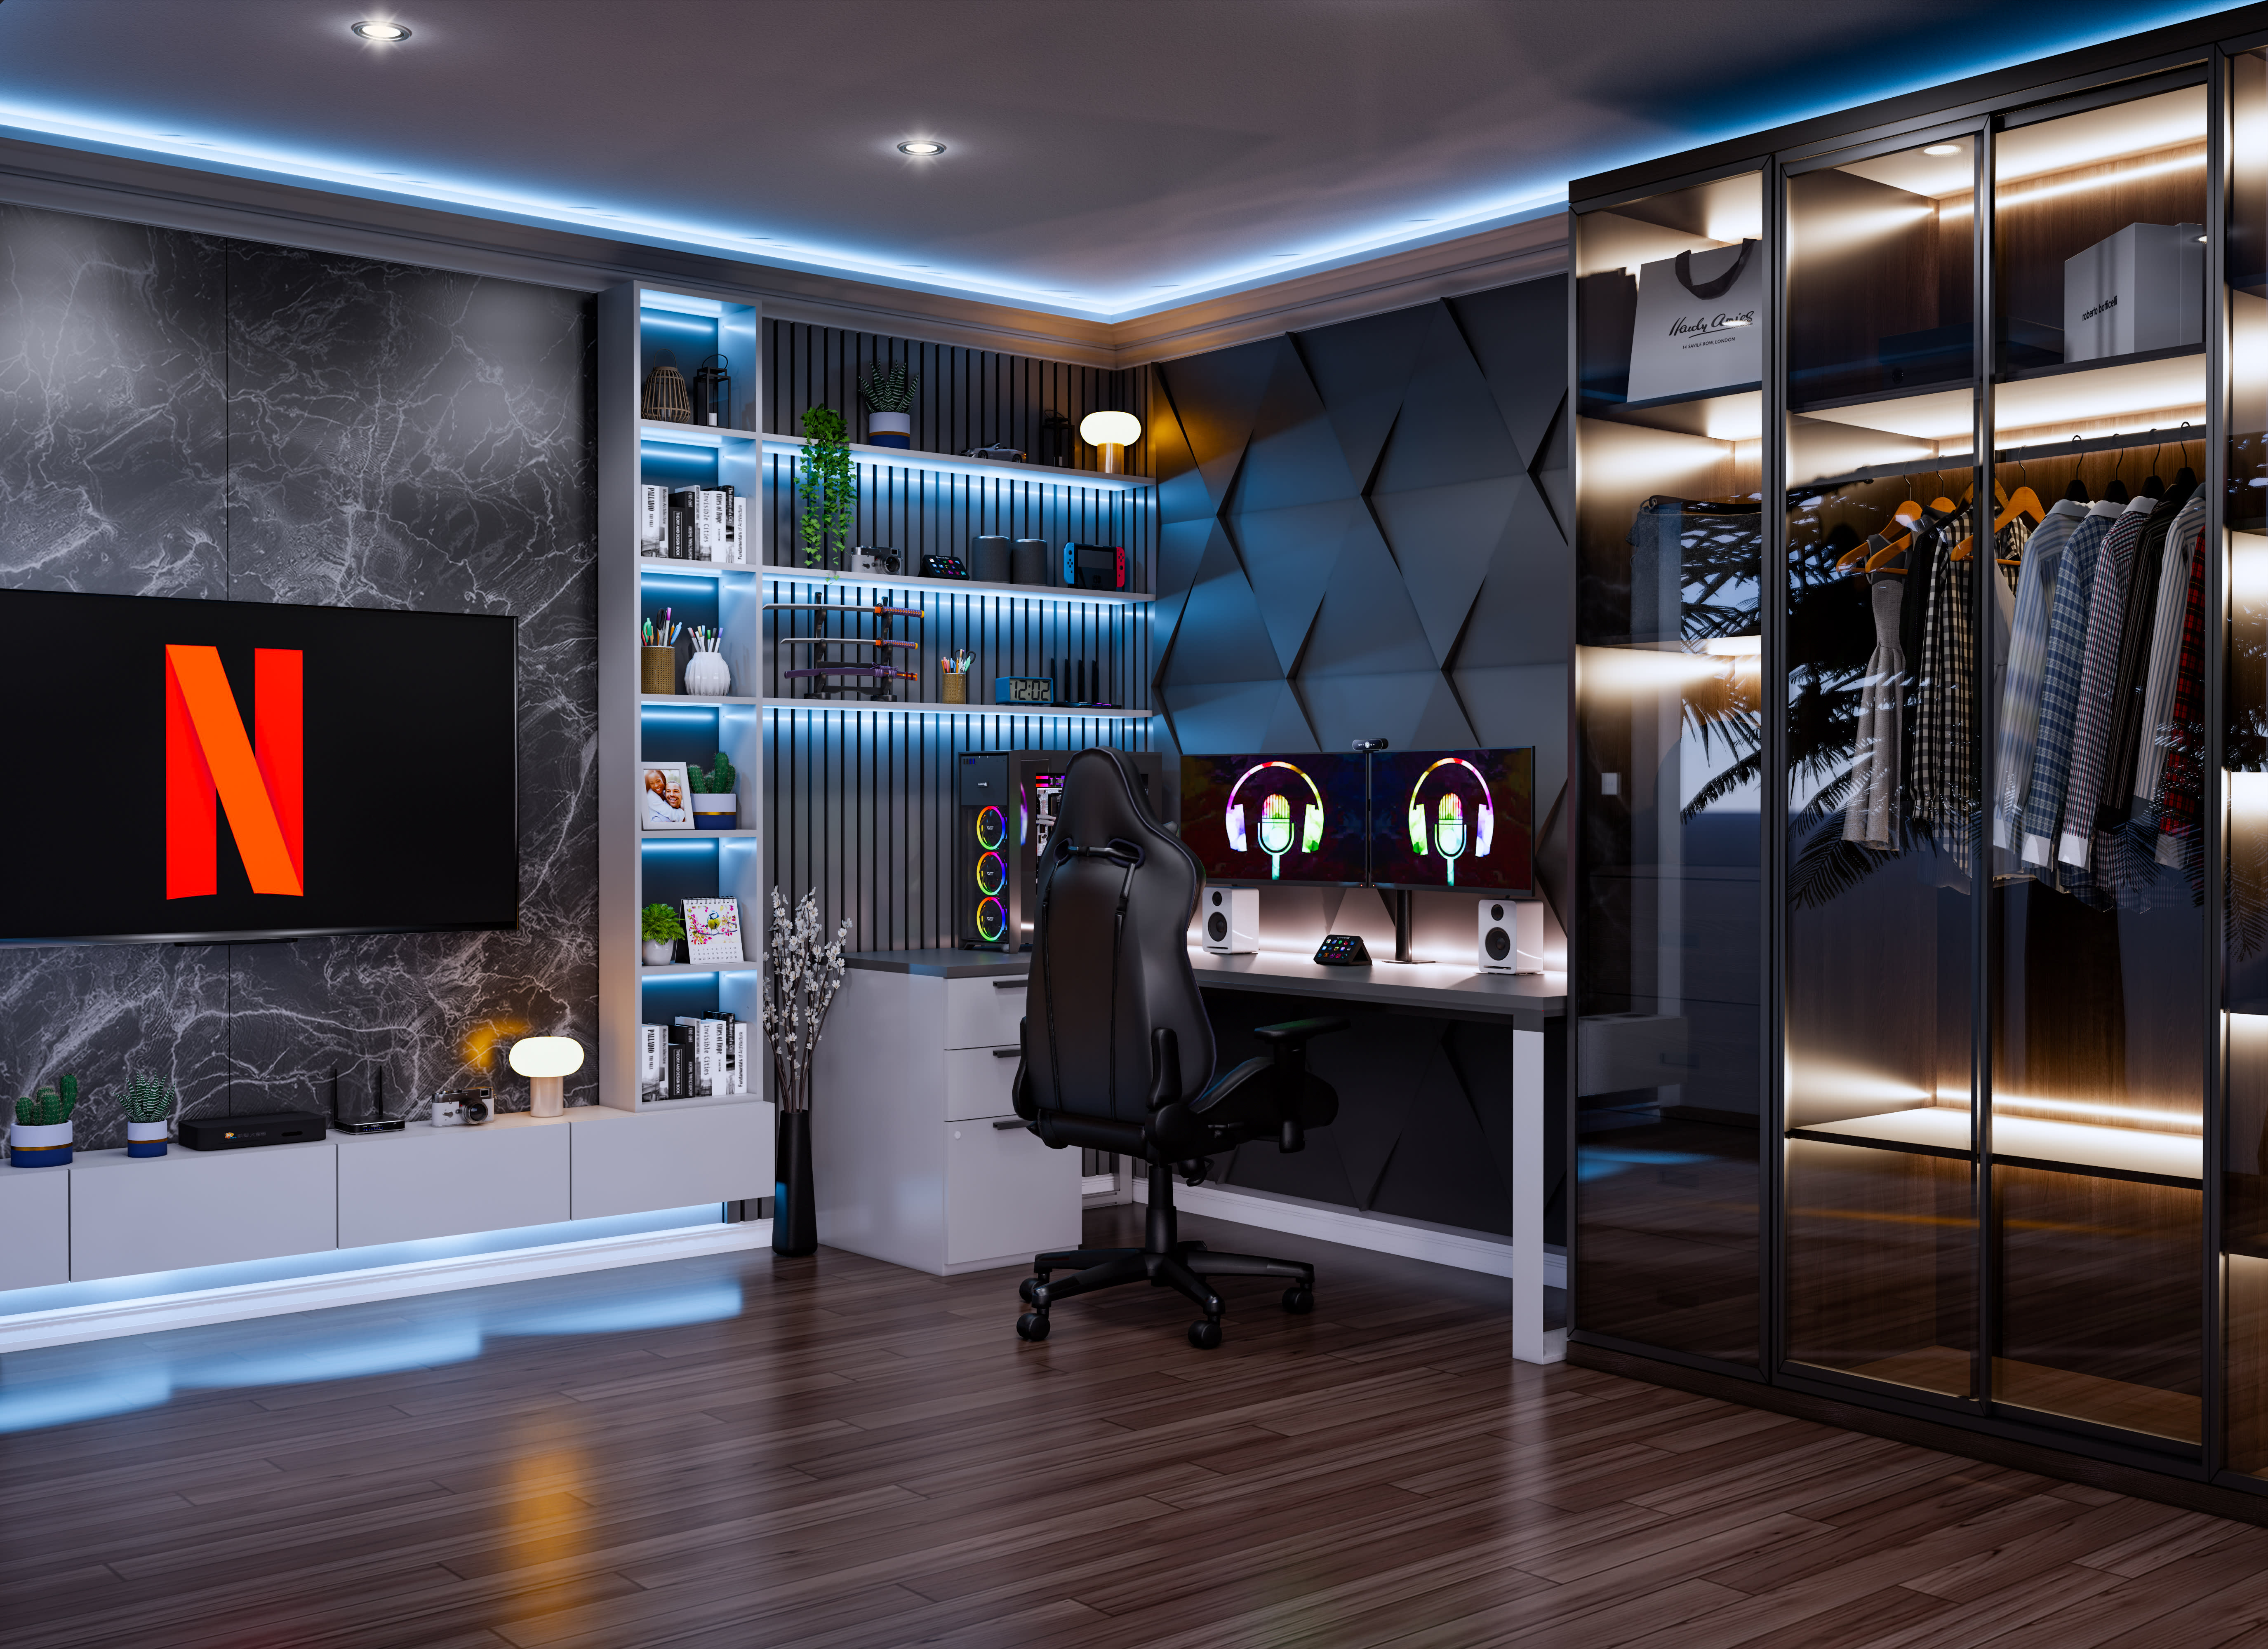 Do your gaming bed room design with isometric and interior setup in 3d by  Roy_antor